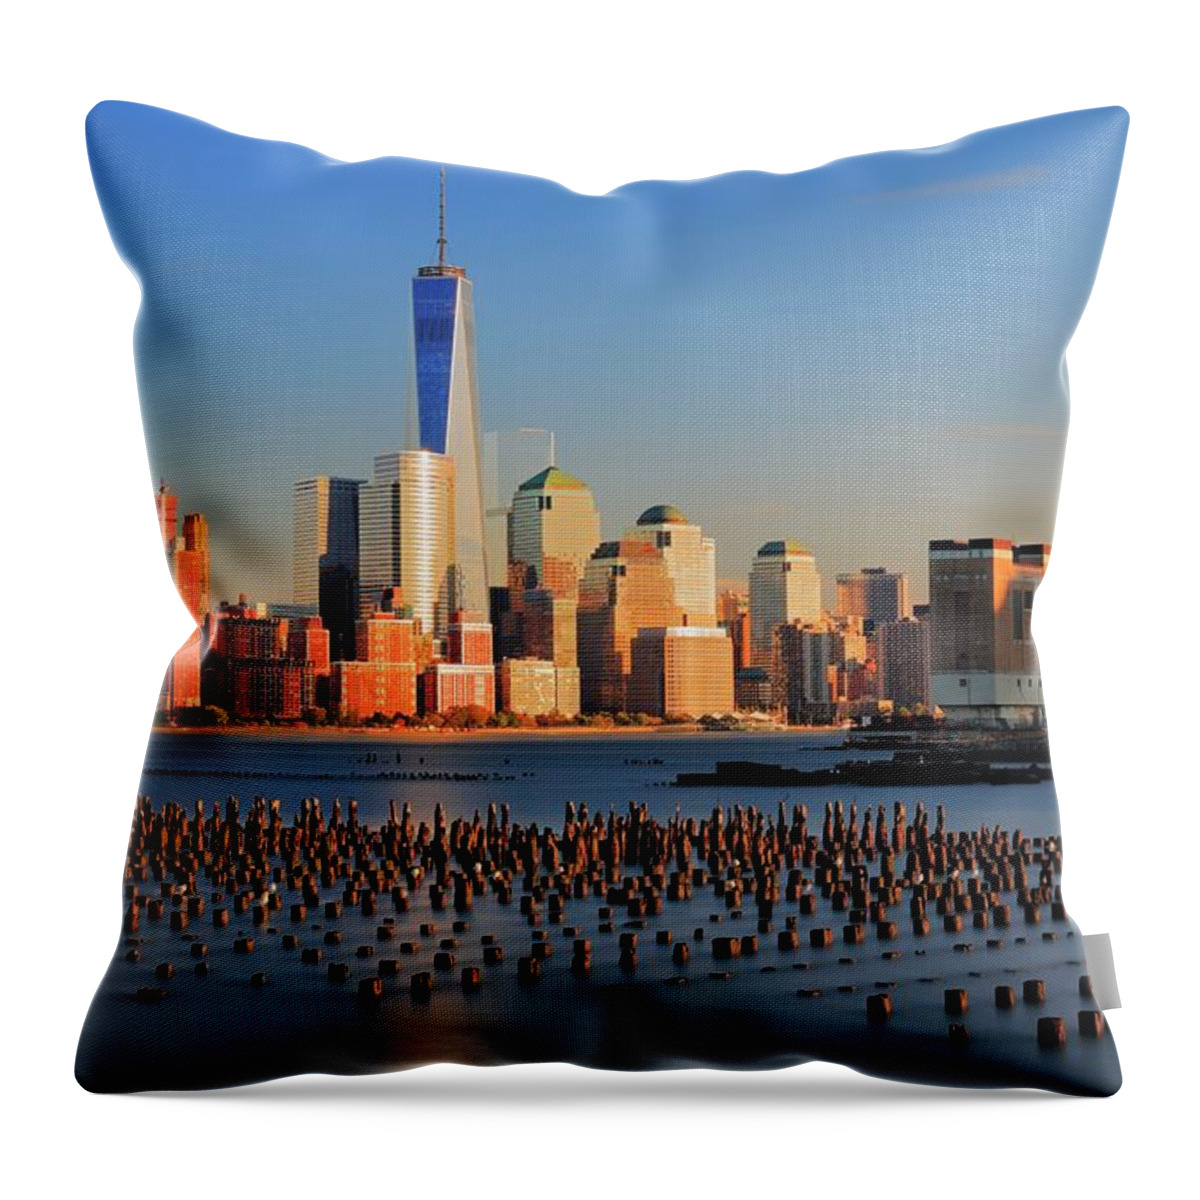 Estock Throw Pillow featuring the digital art New York City, Manhattan, Hudson, Lower Manhattan, One World Trade Center, Freedom Tower, View Across The Hudson River Of The Downtown Manhattan And Financial District Skyline From New Jersey #1 by Riccardo Spila